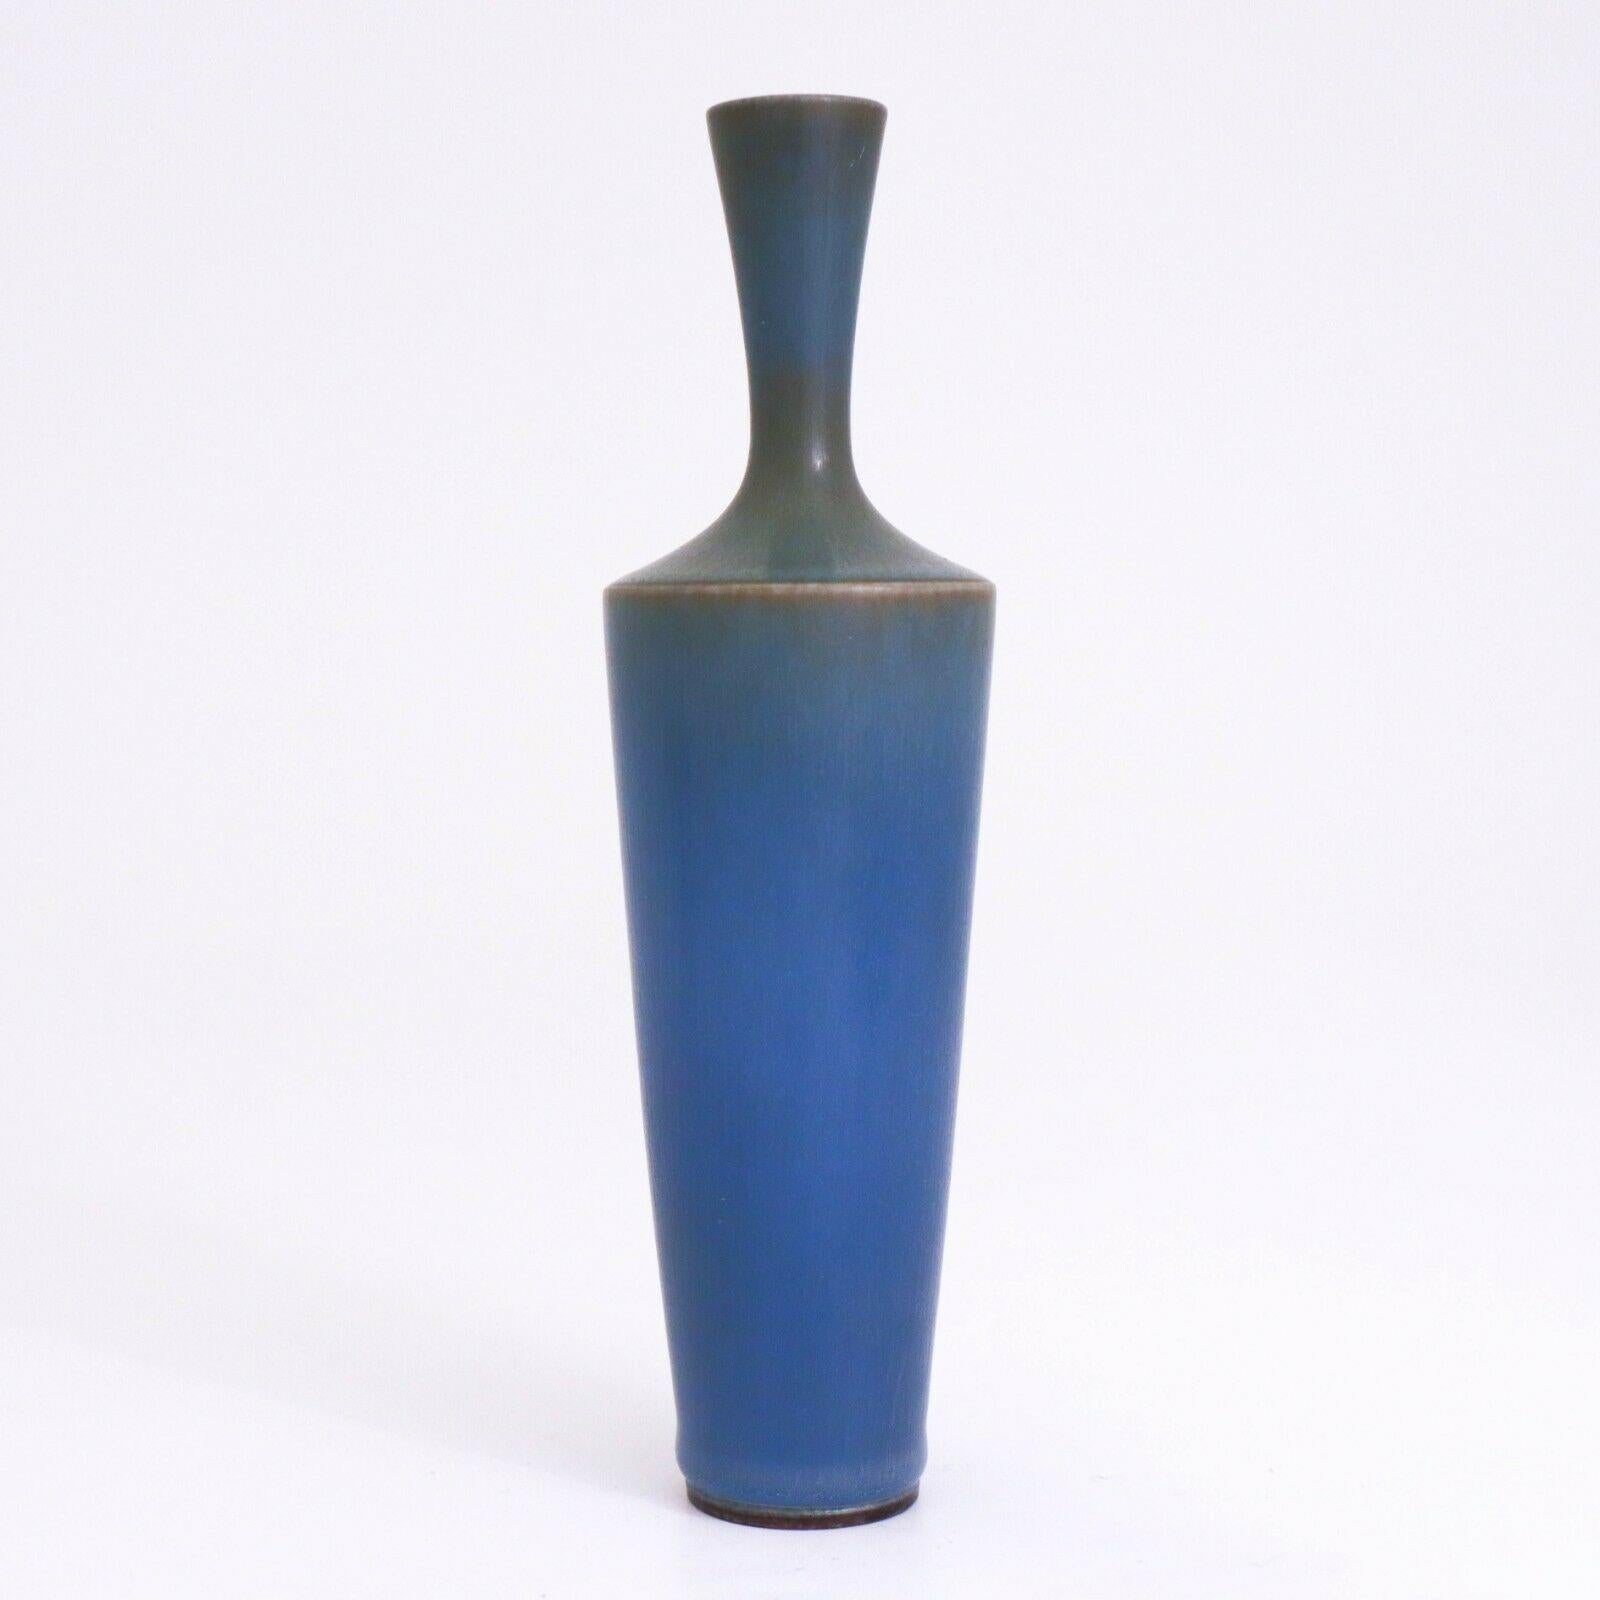 A lovely blue vase designed by Berndt Friberg at Gustavsberg in Stockholm, the vase is 16.5 cm high with a lovely harfur glase. It ´s marked as on picture and was made in 1958. It is in excellent condition.